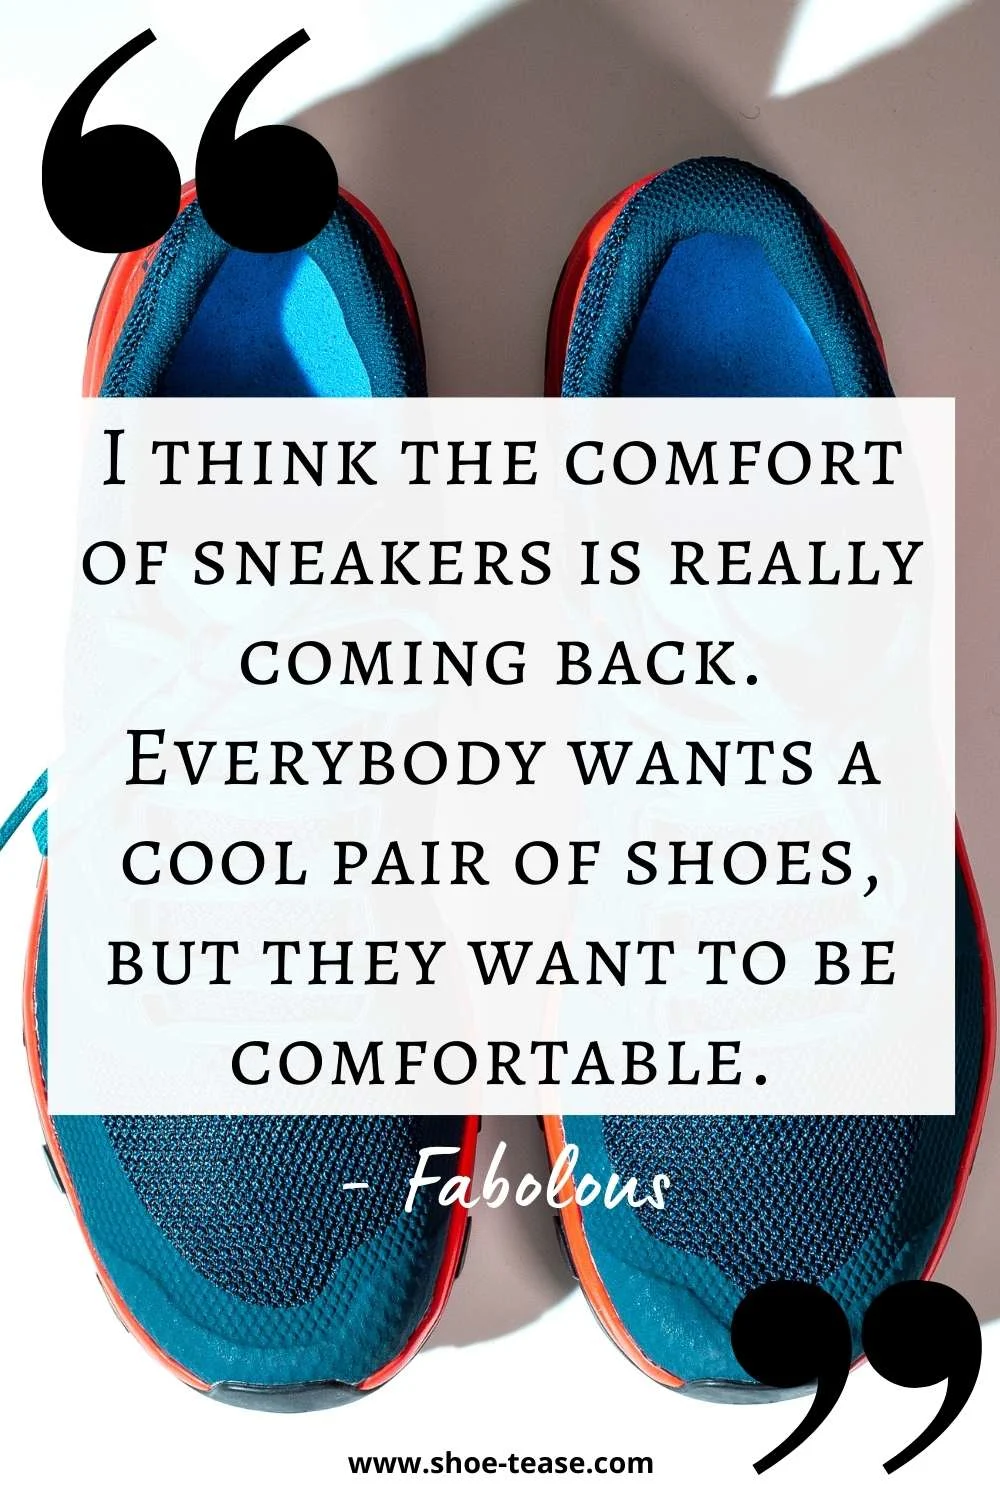 Sneakers Quote by Fabolous reading I think the comfort of sneakers is really coming back. Everybody wants a cool pair of shoes, but they want to be comfortable over image of sneakers.